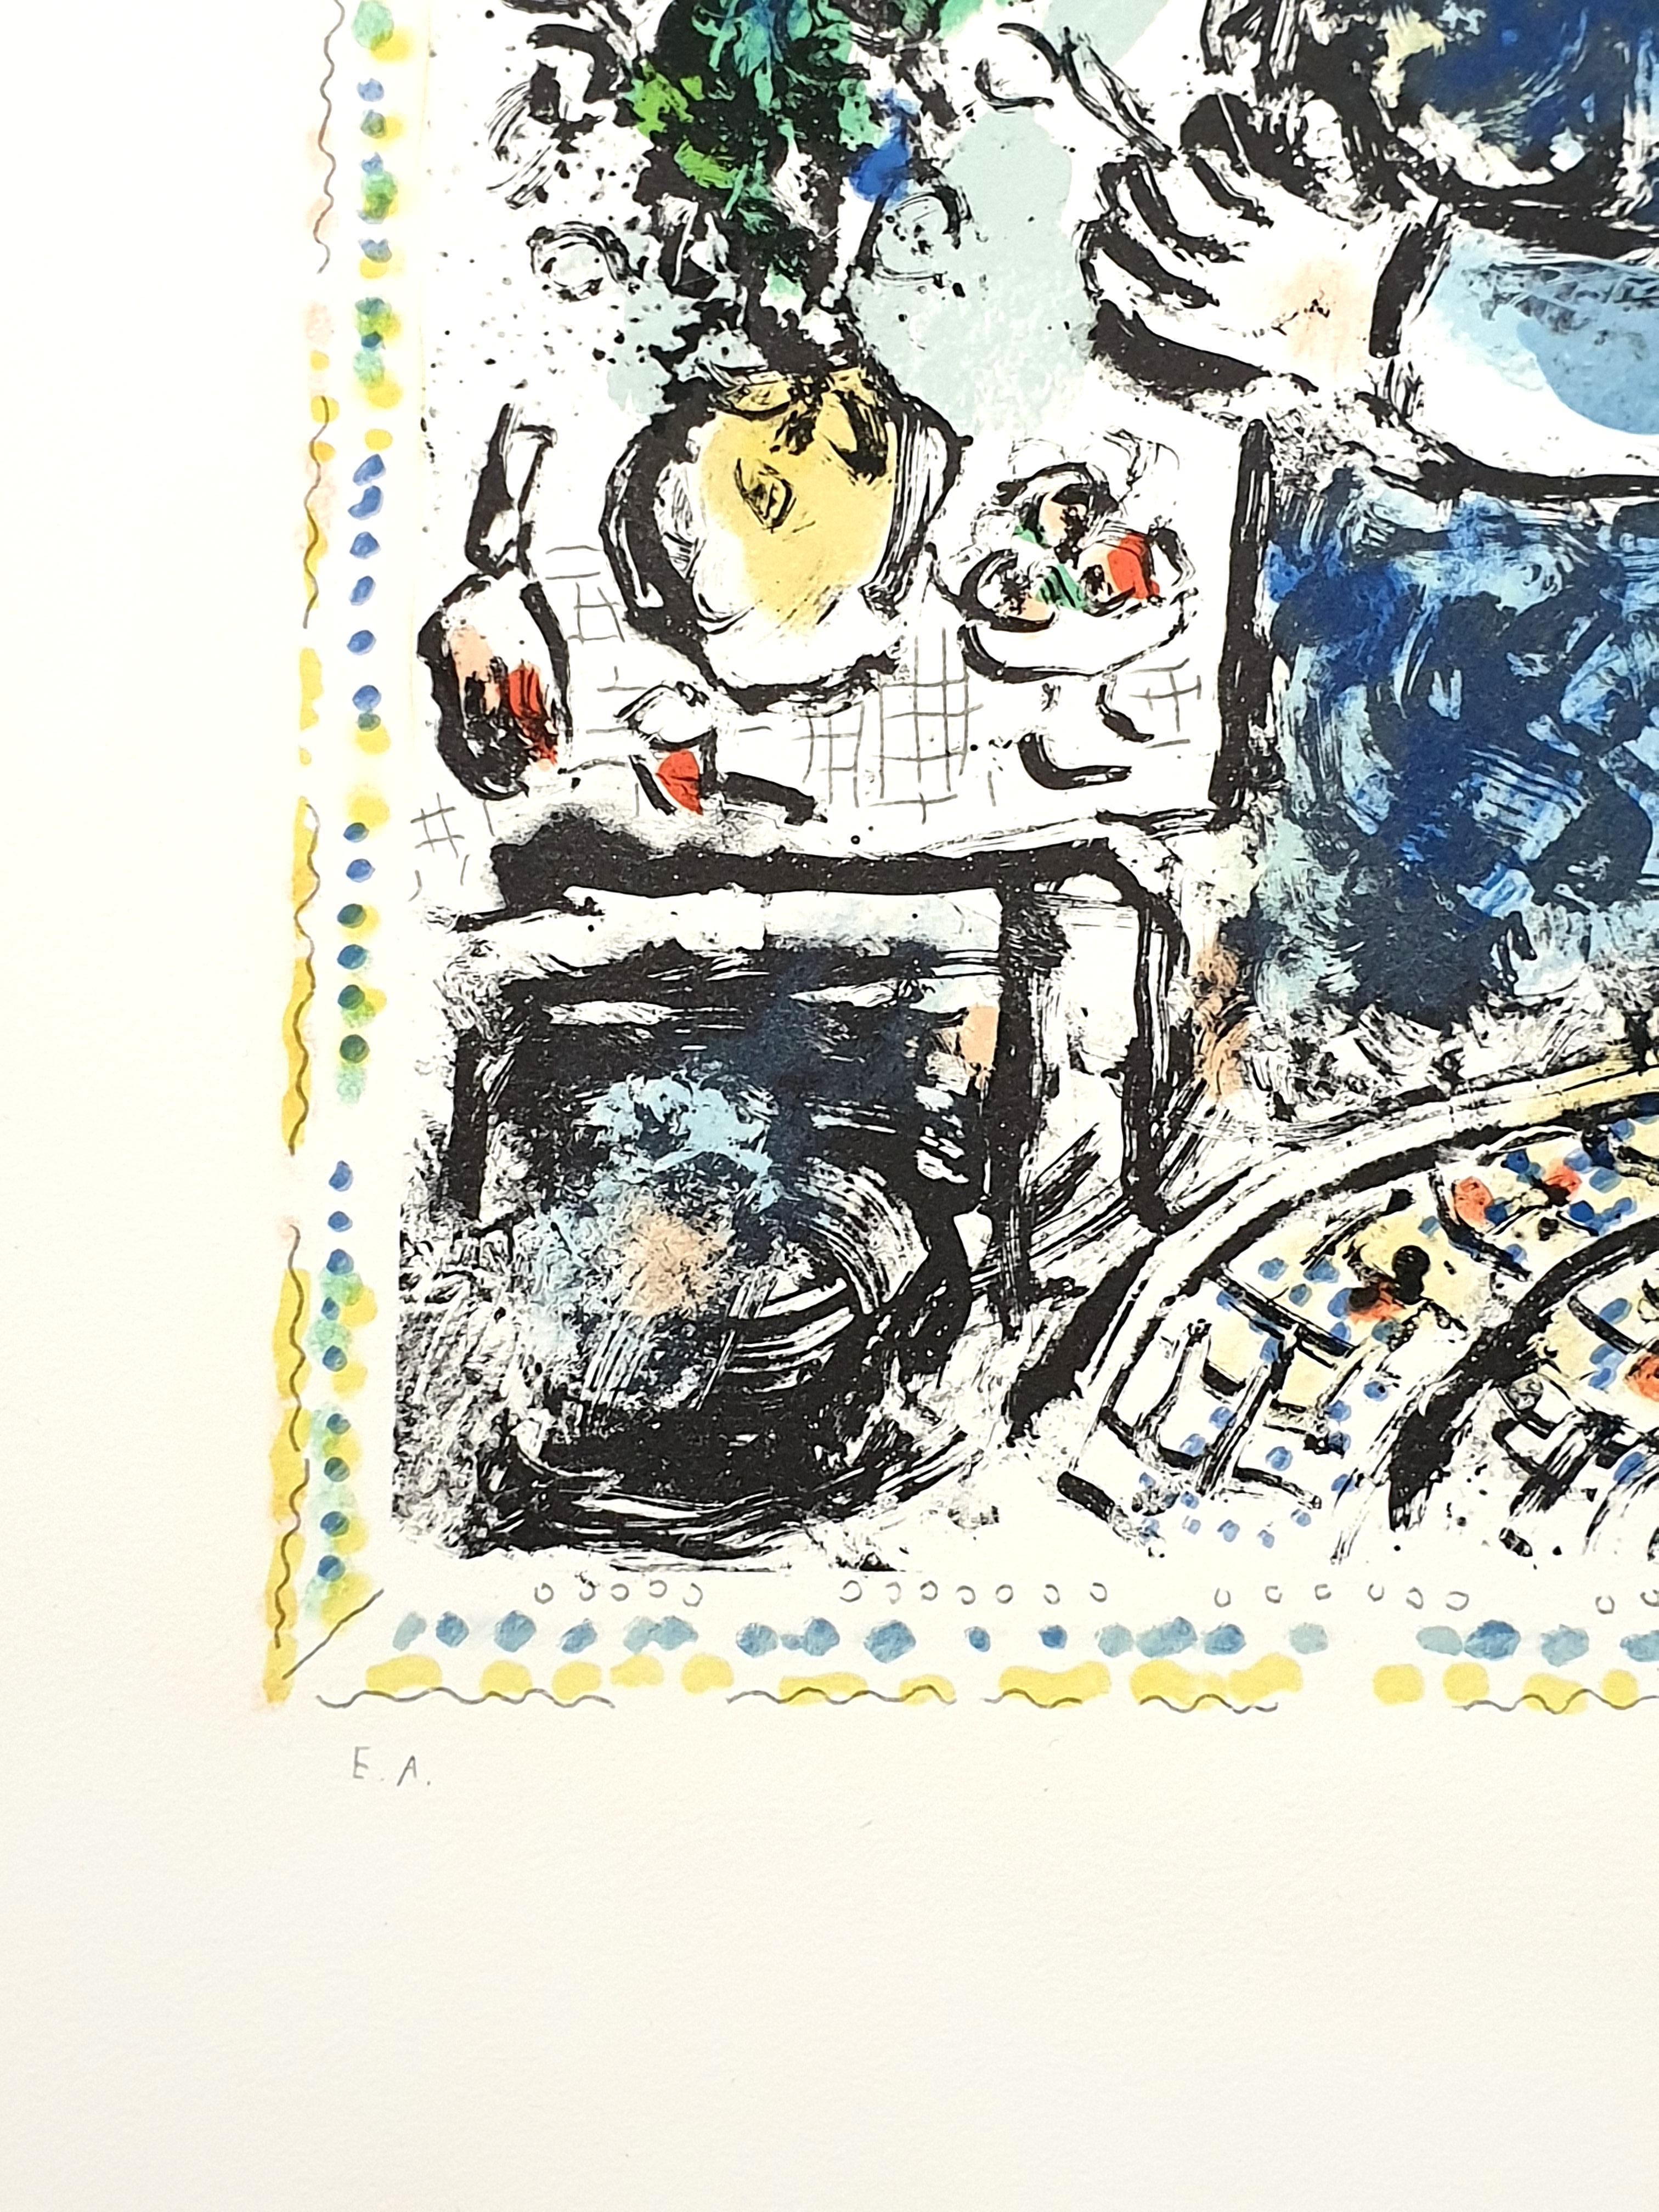 Marc Chagall - The Blue Workshop - Original Handsigned Lithograph
1983
Printed by Mourlot
Dimensions: 65 x 47.5 cm 
Handsigned in pencil
Justified EA (Epreuve D'artiste, Artist proof) aside from the edition of 50.
Medium : Arches Vellum